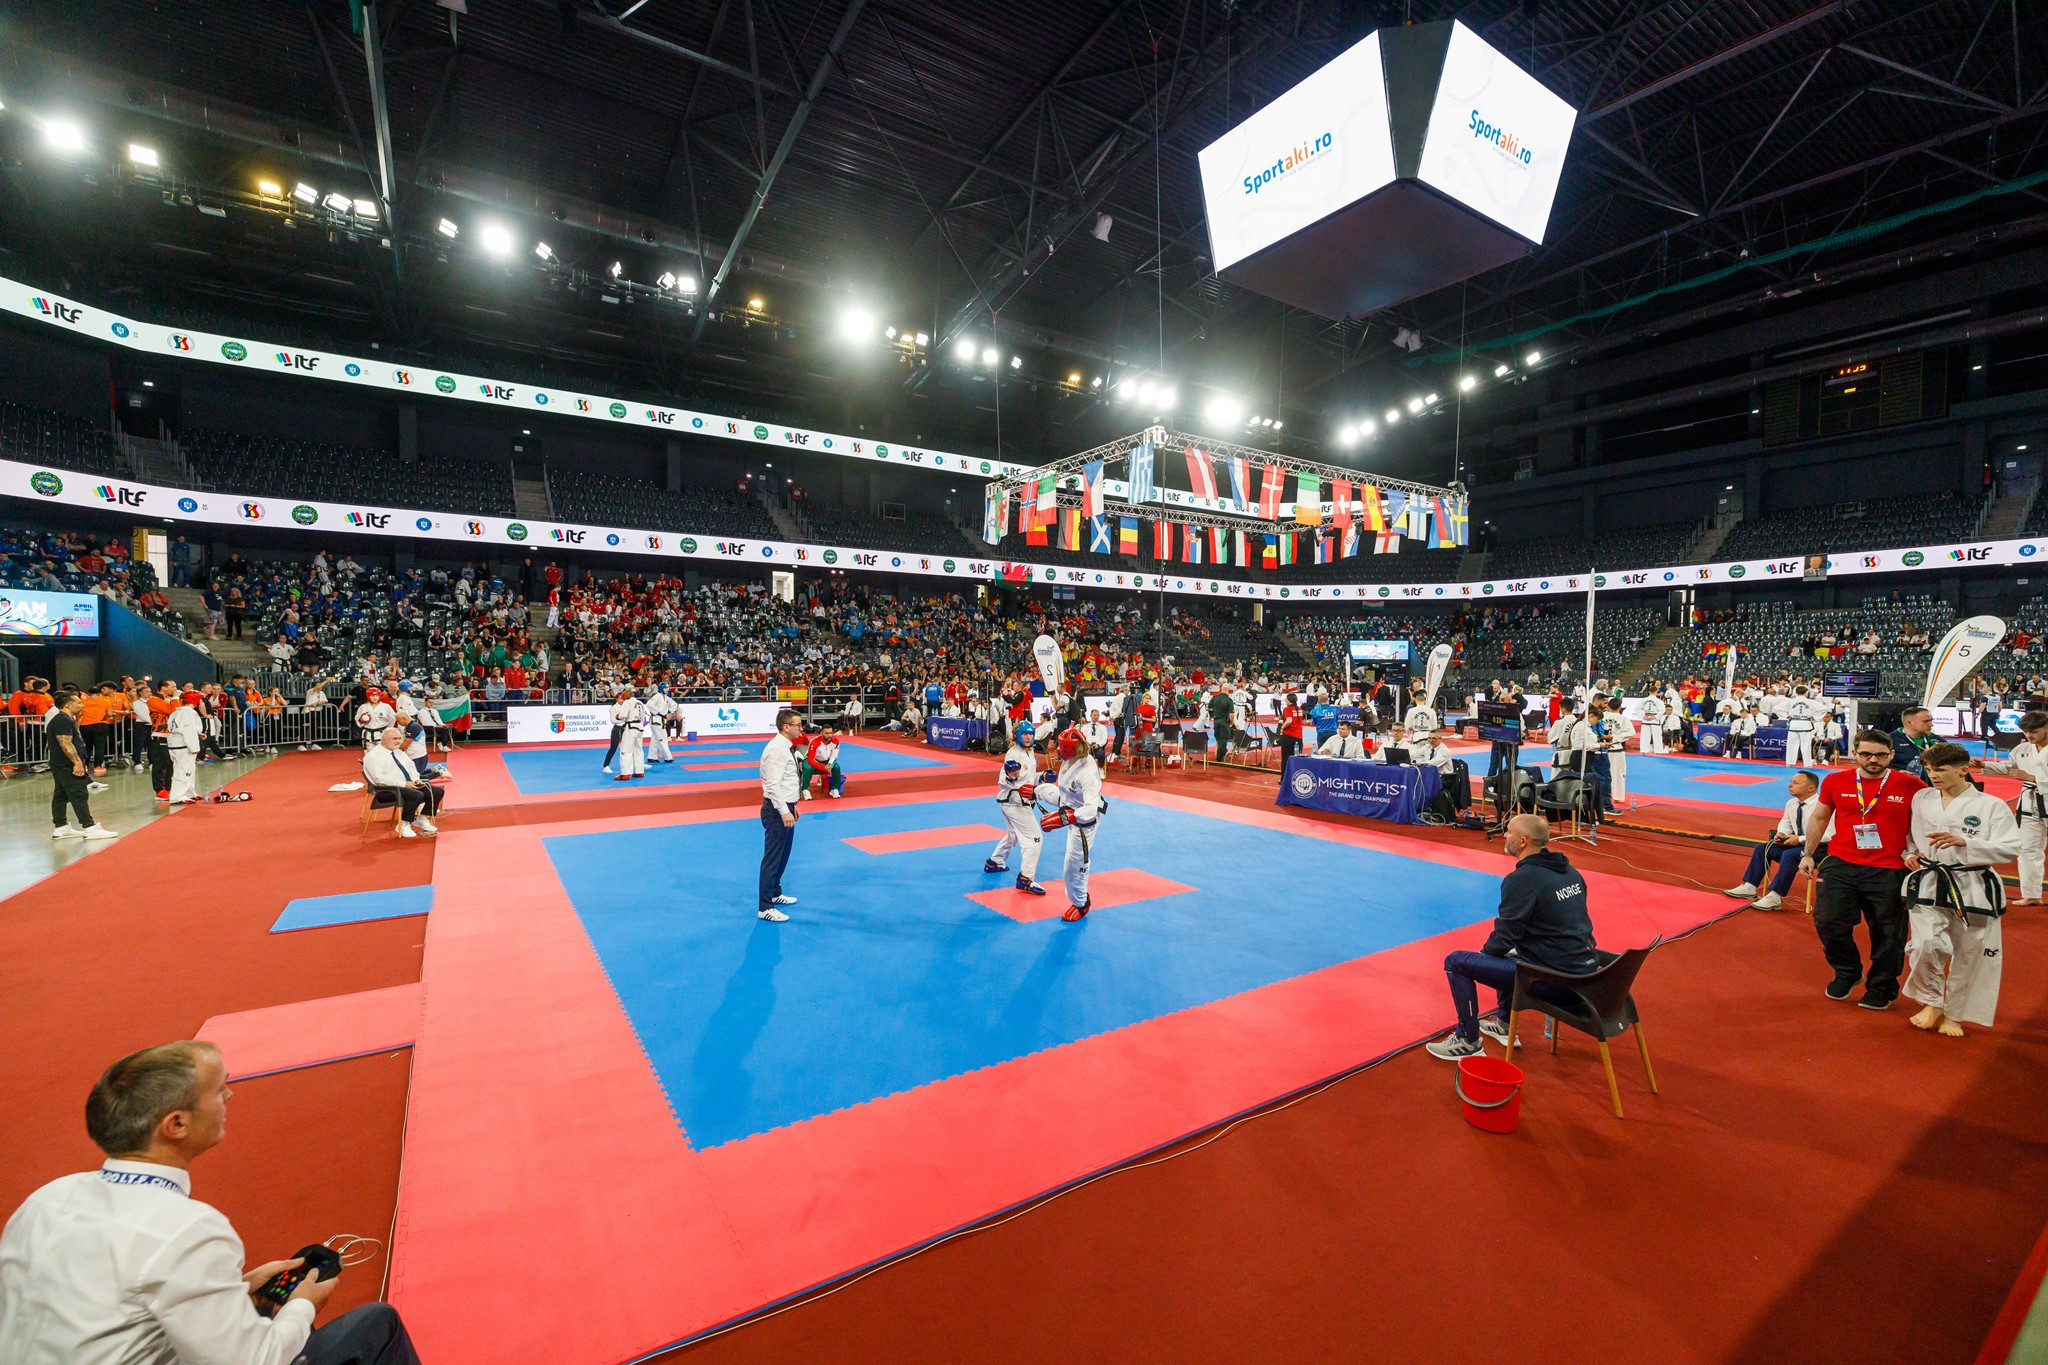 Competition was staged at the BTarena in Cluj-Napoca ©AETF